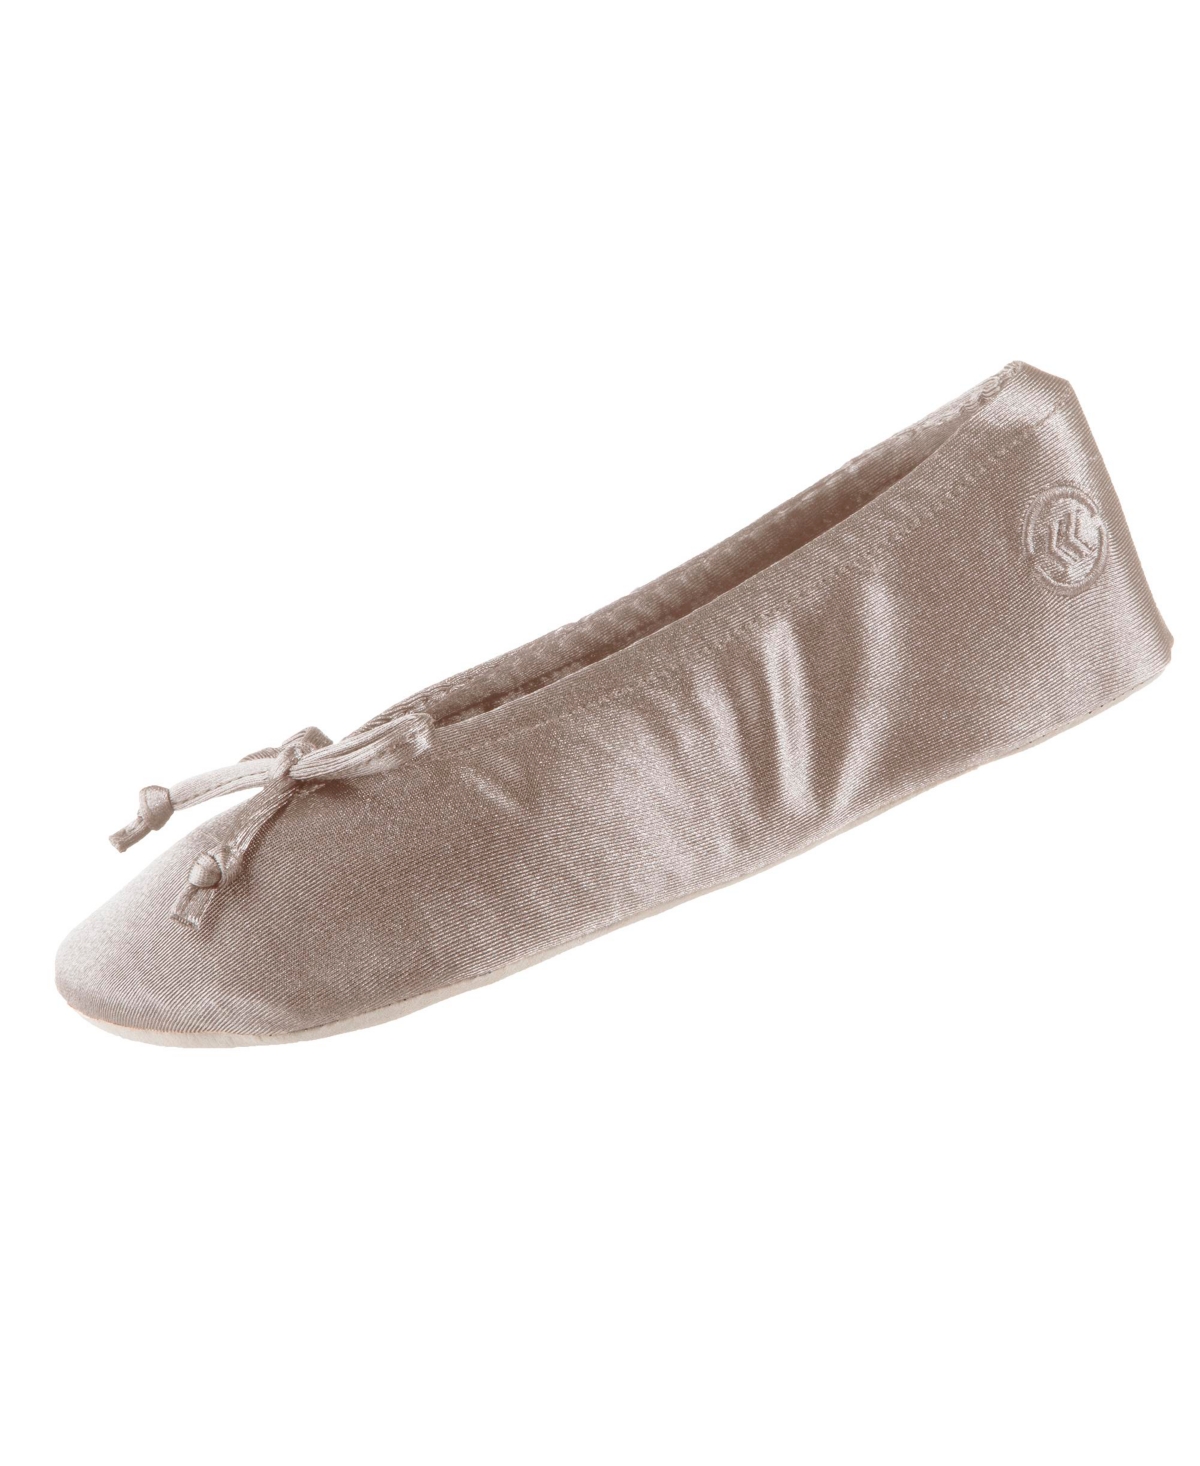 Isotoner Signature Women's Satin Ballerina Slippers With Bow In Sand Trap